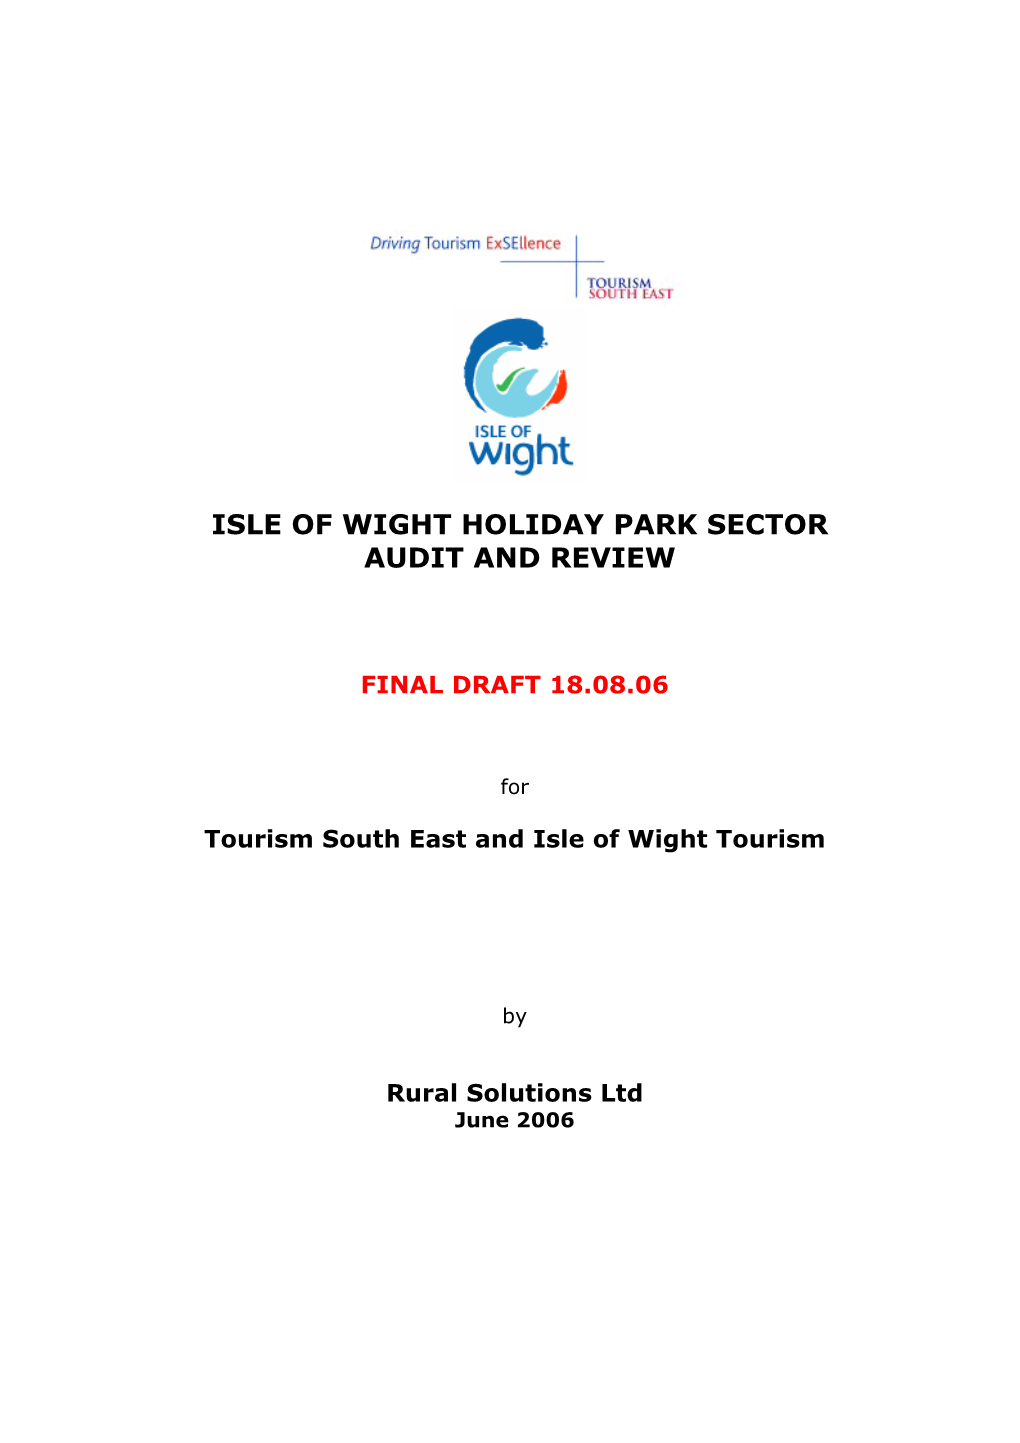 Isle of Wight Holiday Park Sector Audit and Review